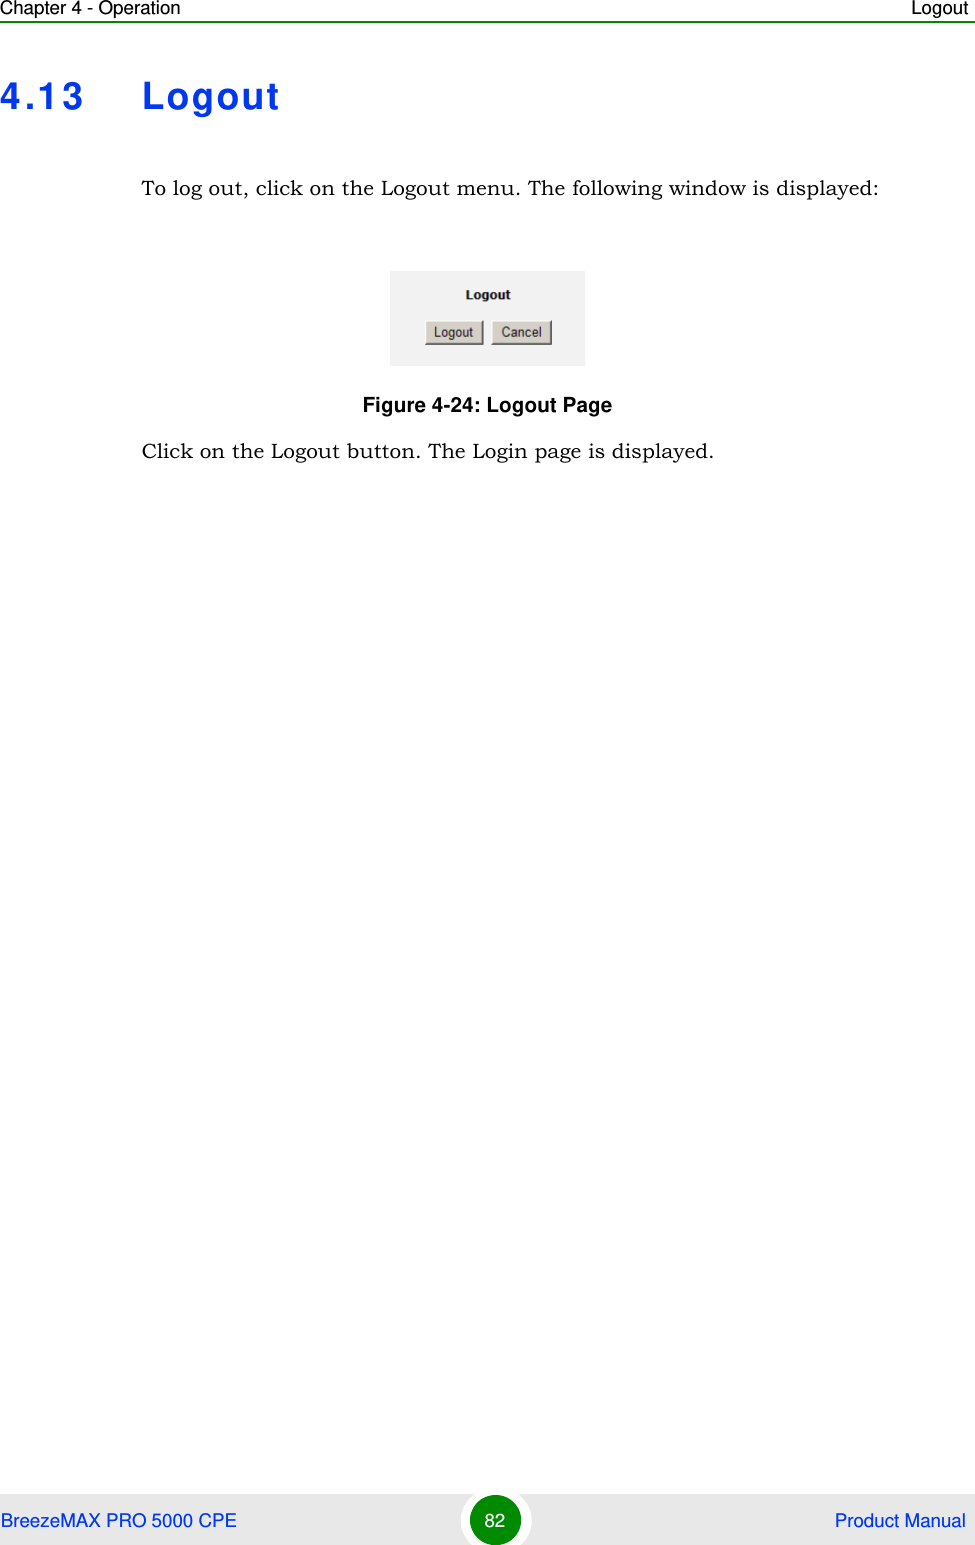 Chapter 4 - Operation LogoutBreezeMAX PRO 5000 CPE 82  Product Manual4.13 LogoutTo log out, click on the Logout menu. The following window is displayed:Click on the Logout button. The Login page is displayed.Figure 4-24: Logout Page